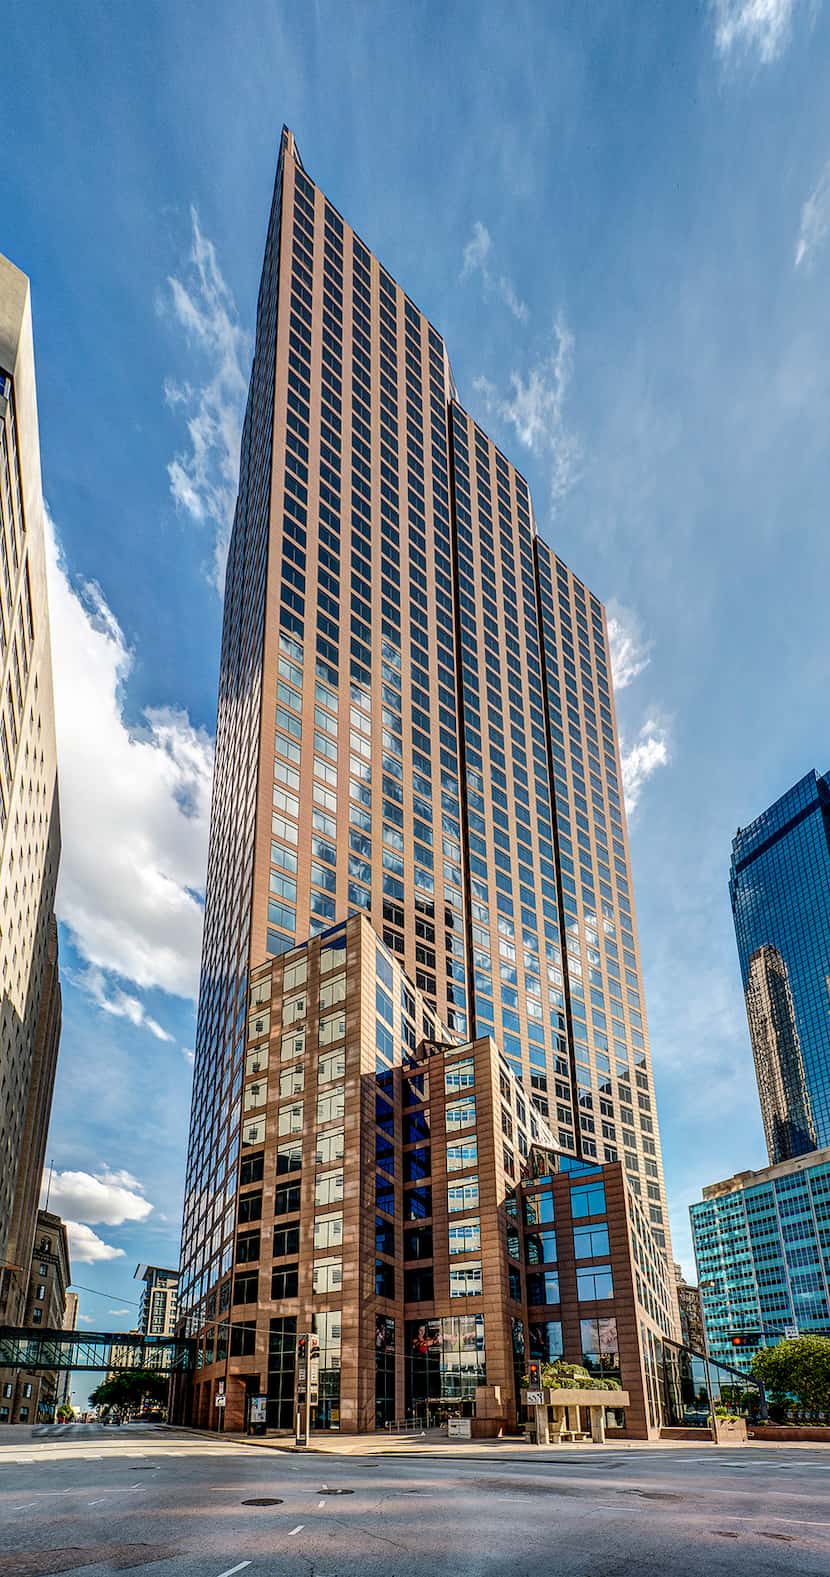 Akin Gump now has about 90 attorneys working in the 49-story 1700 Pacific tower downtown.